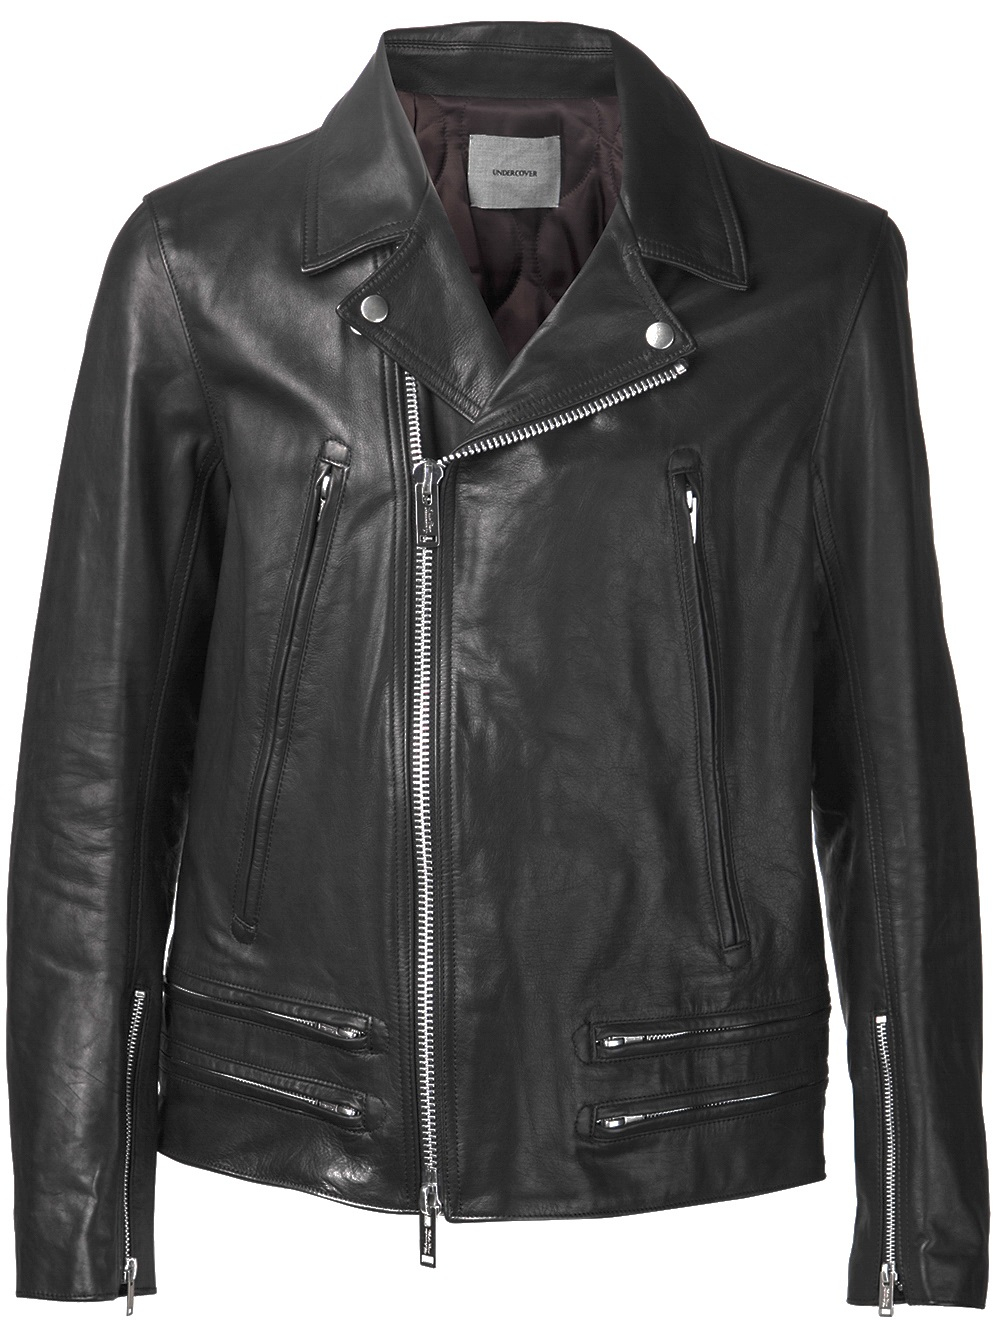 Lyst - Undercover Leather Jacket in Black for Men